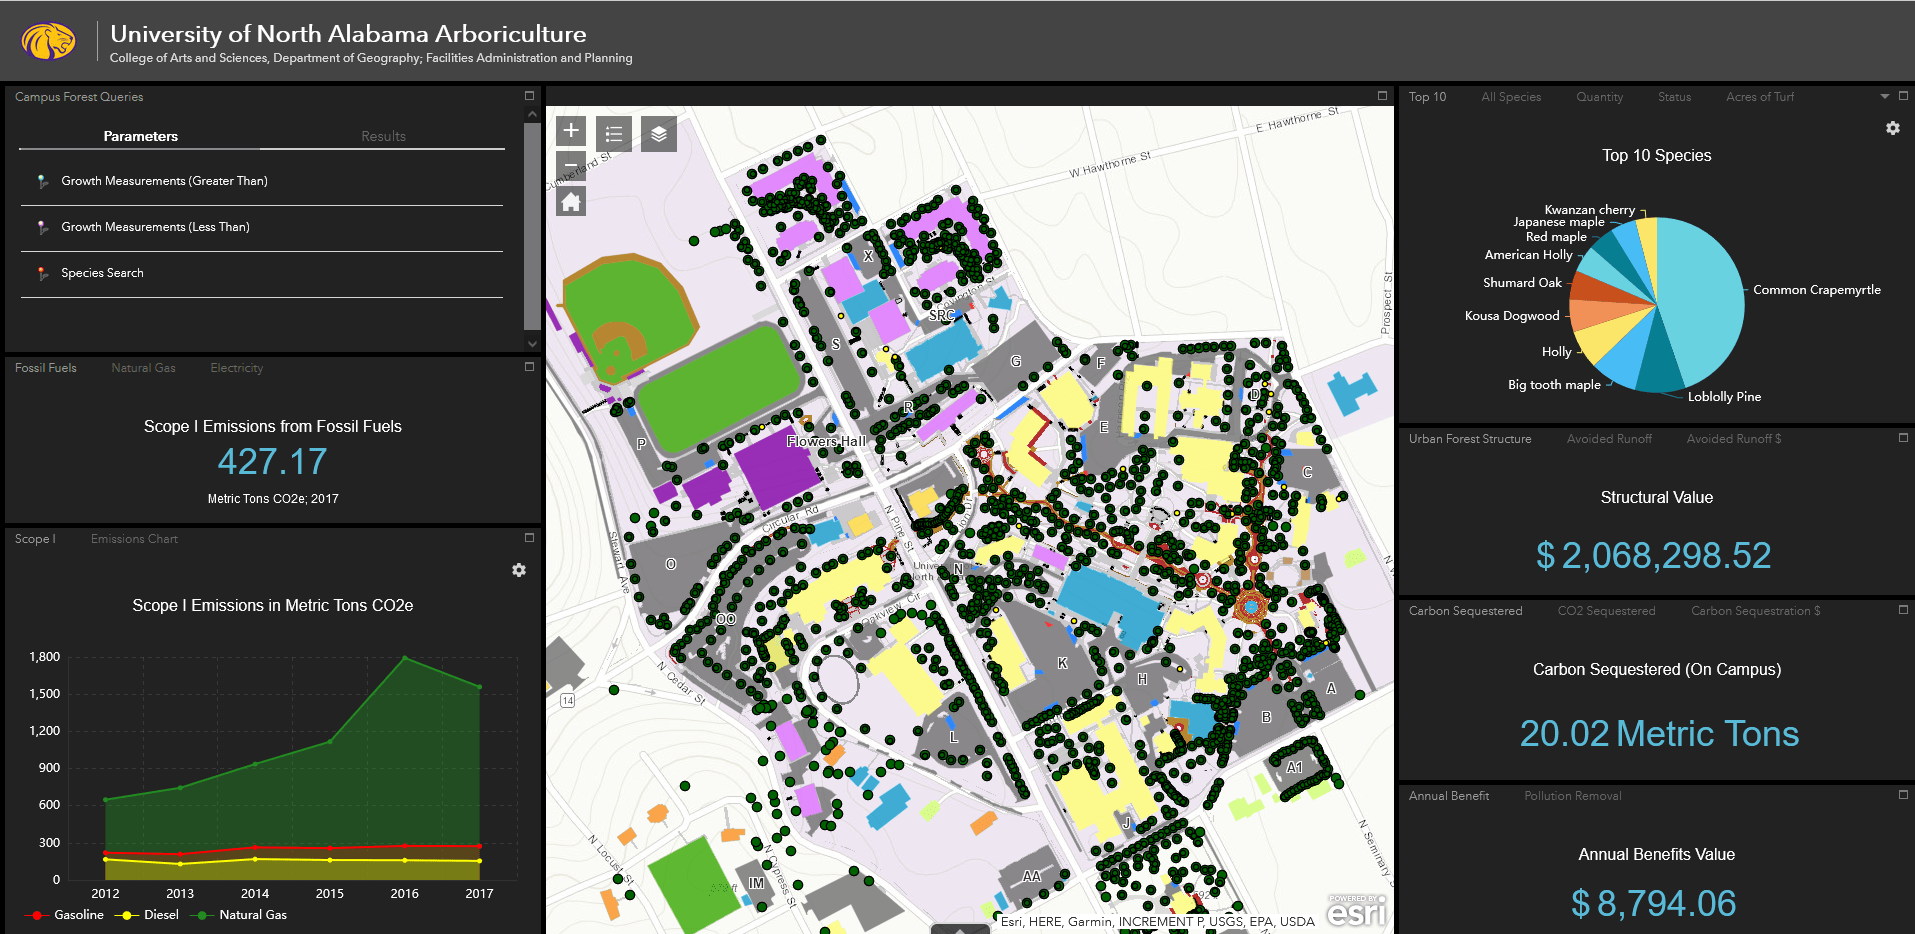 ArcGIS Dashboard providing campus vegetation data visualizations as charts, gauges, and assets